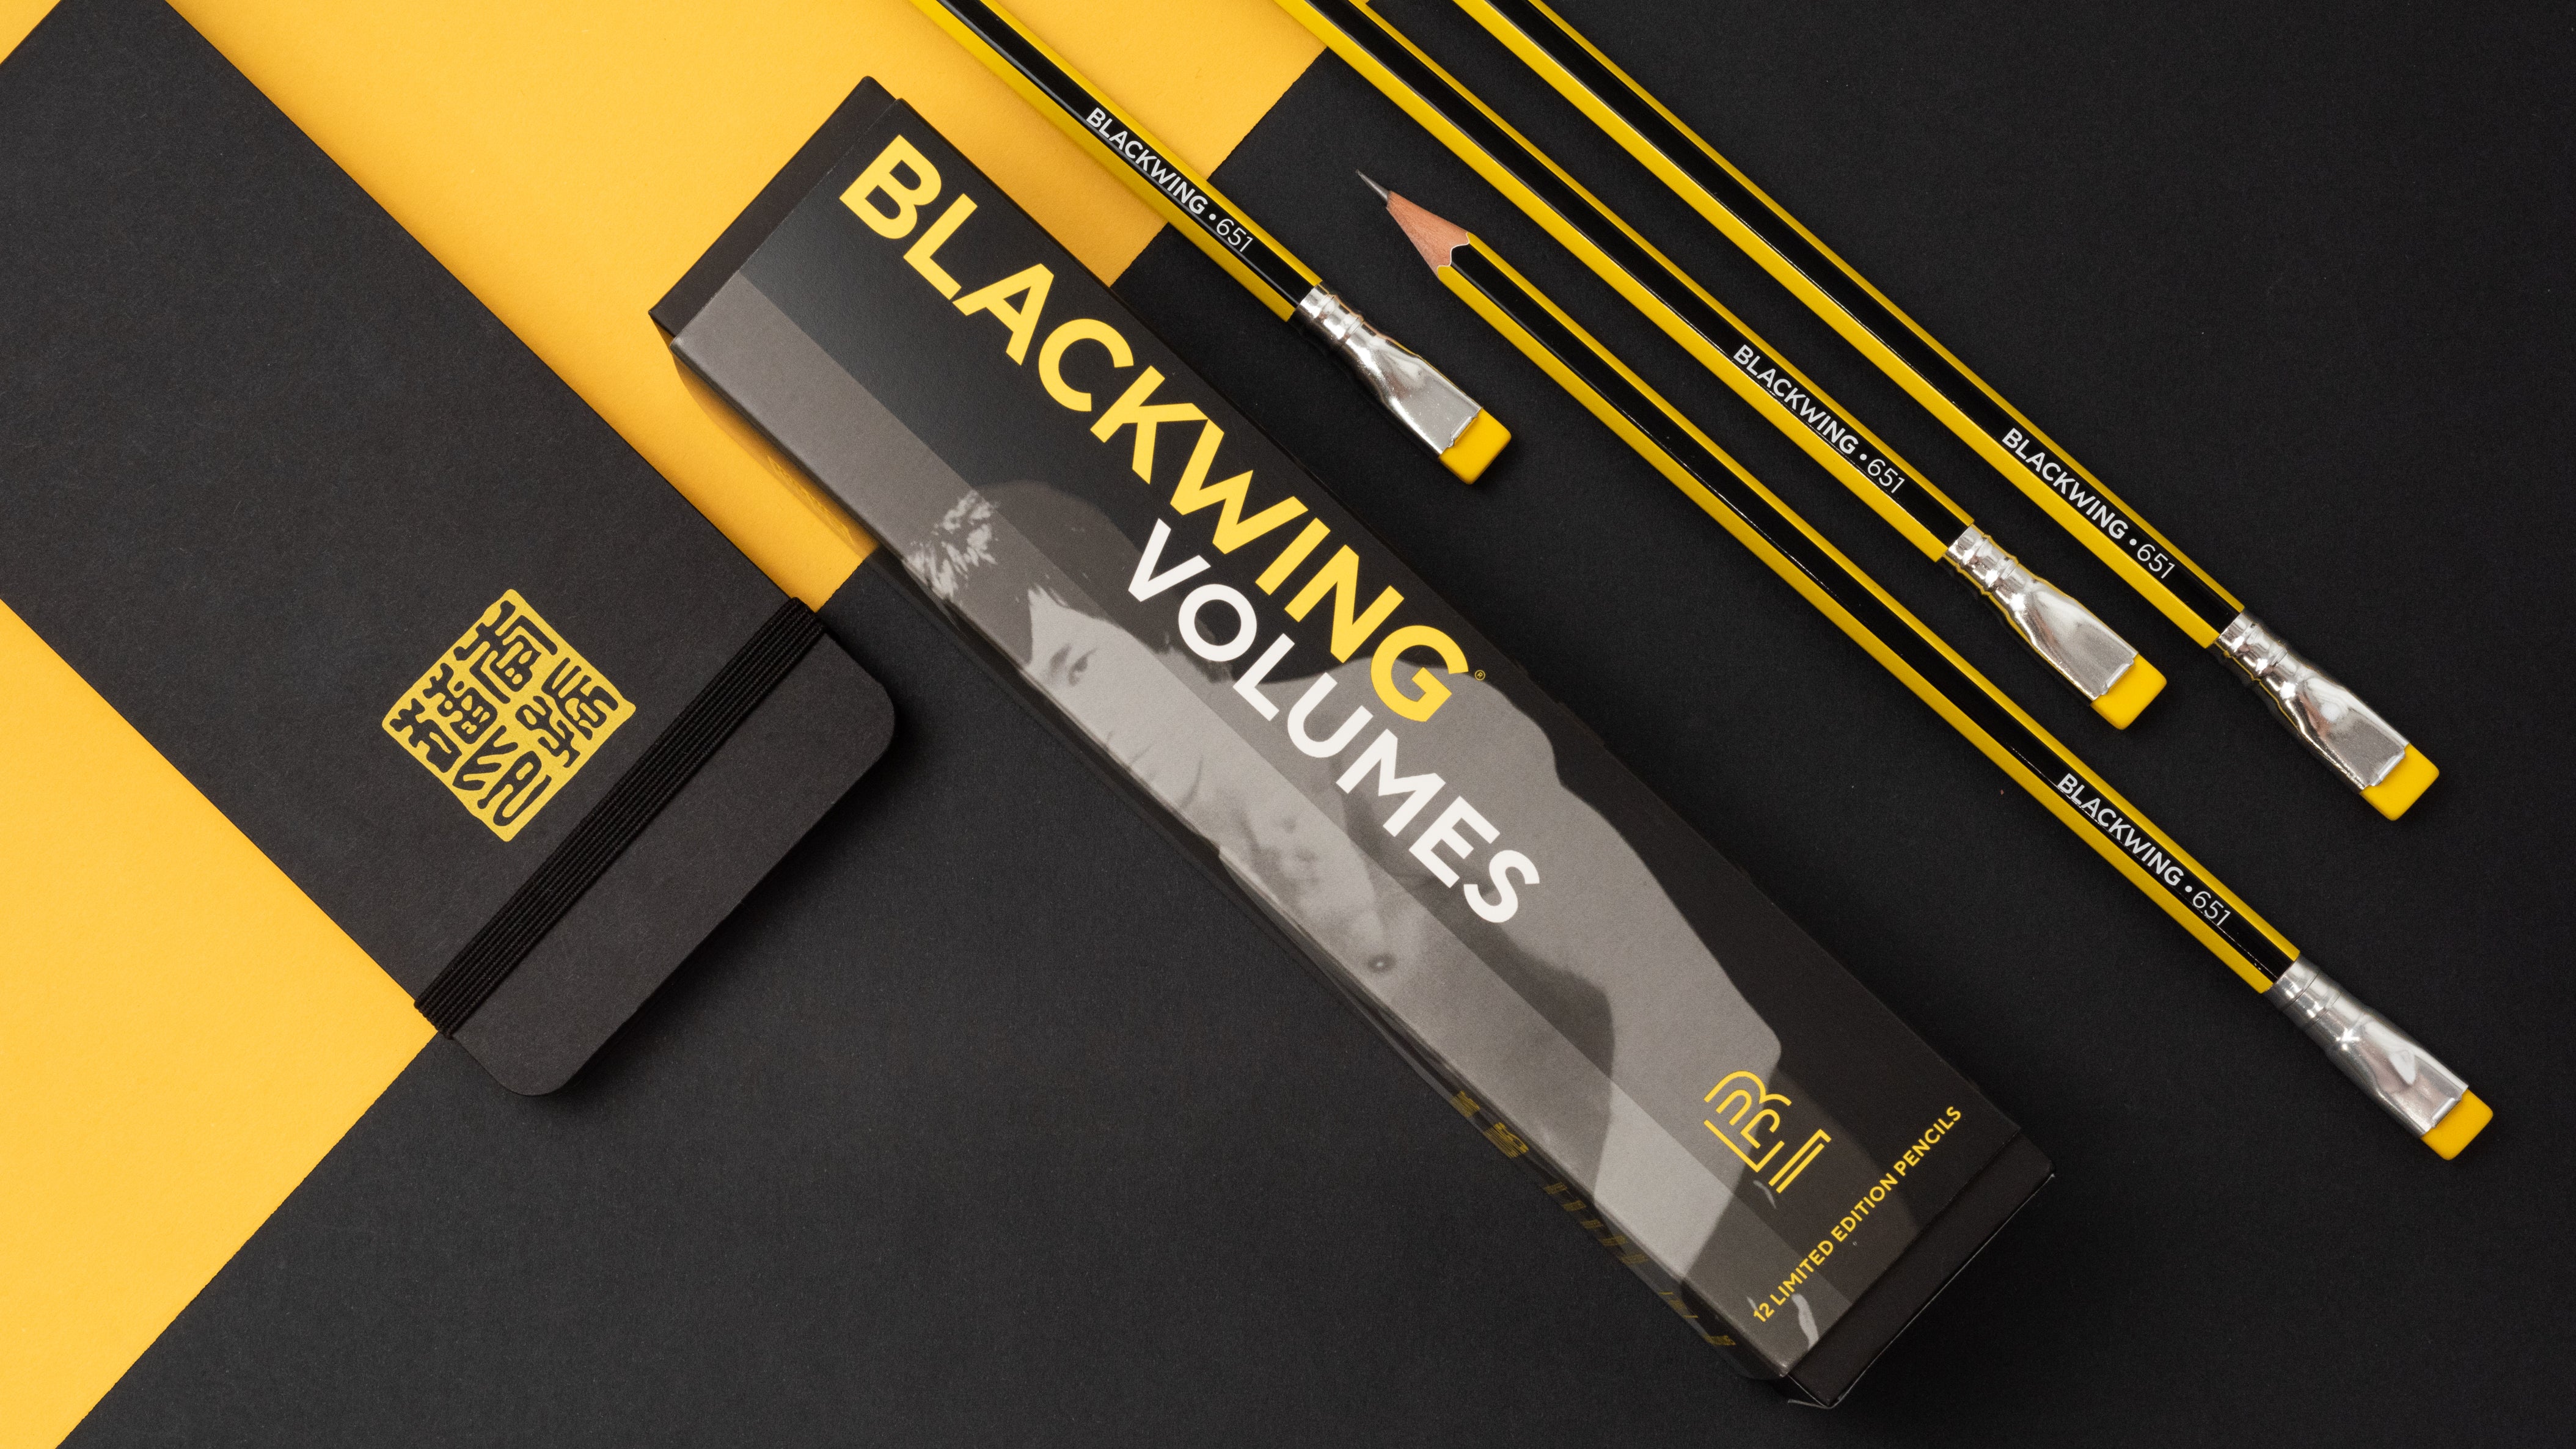 Blackwing Volumes 651- Bruce Lee Edition Pencil 12 Pack